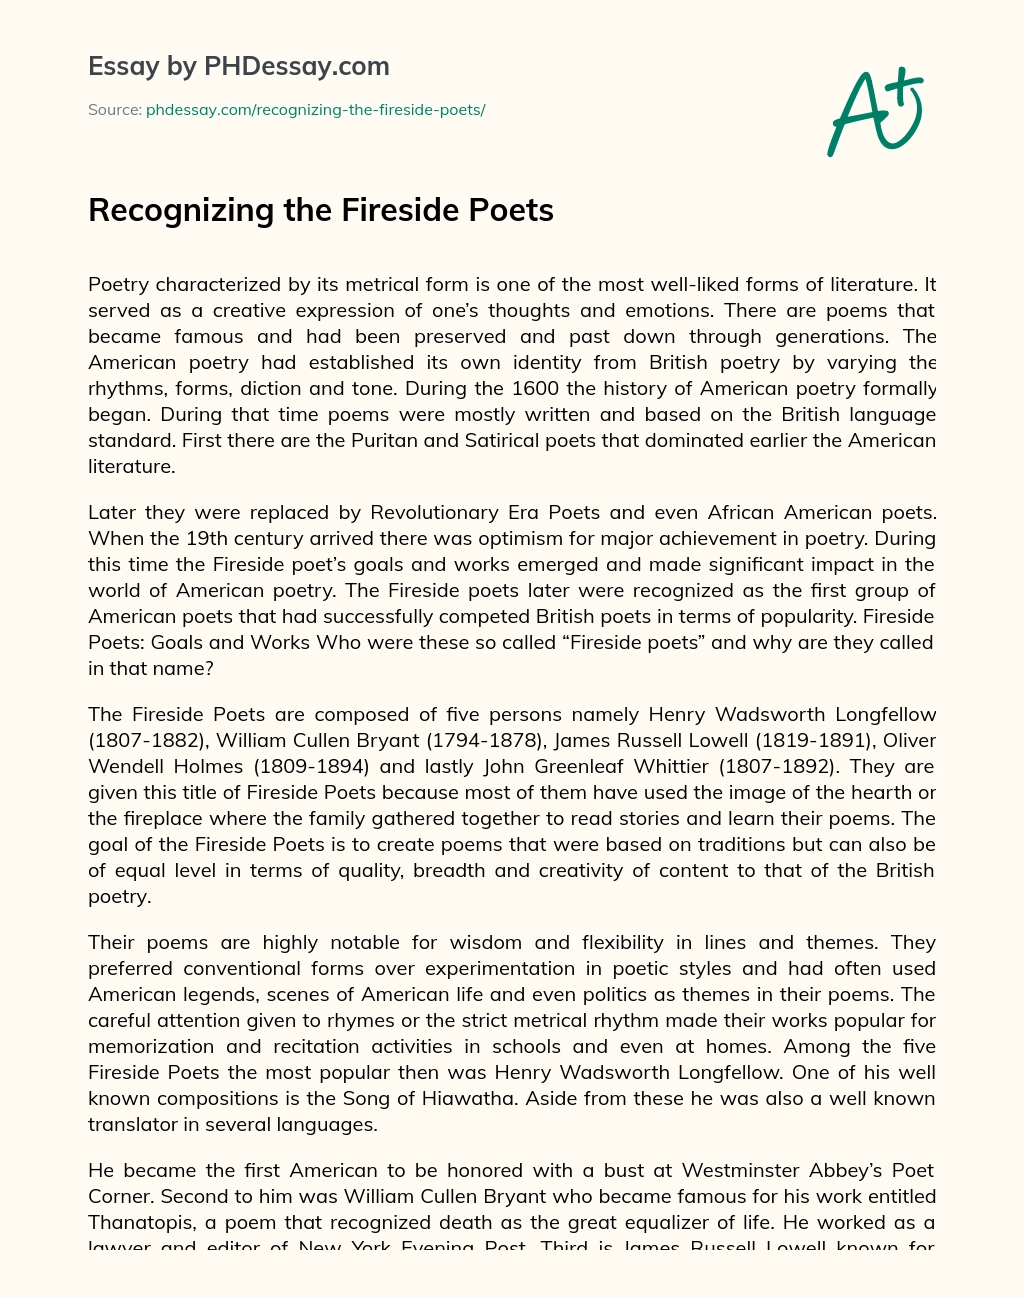 Recognizing the Fireside Poets essay